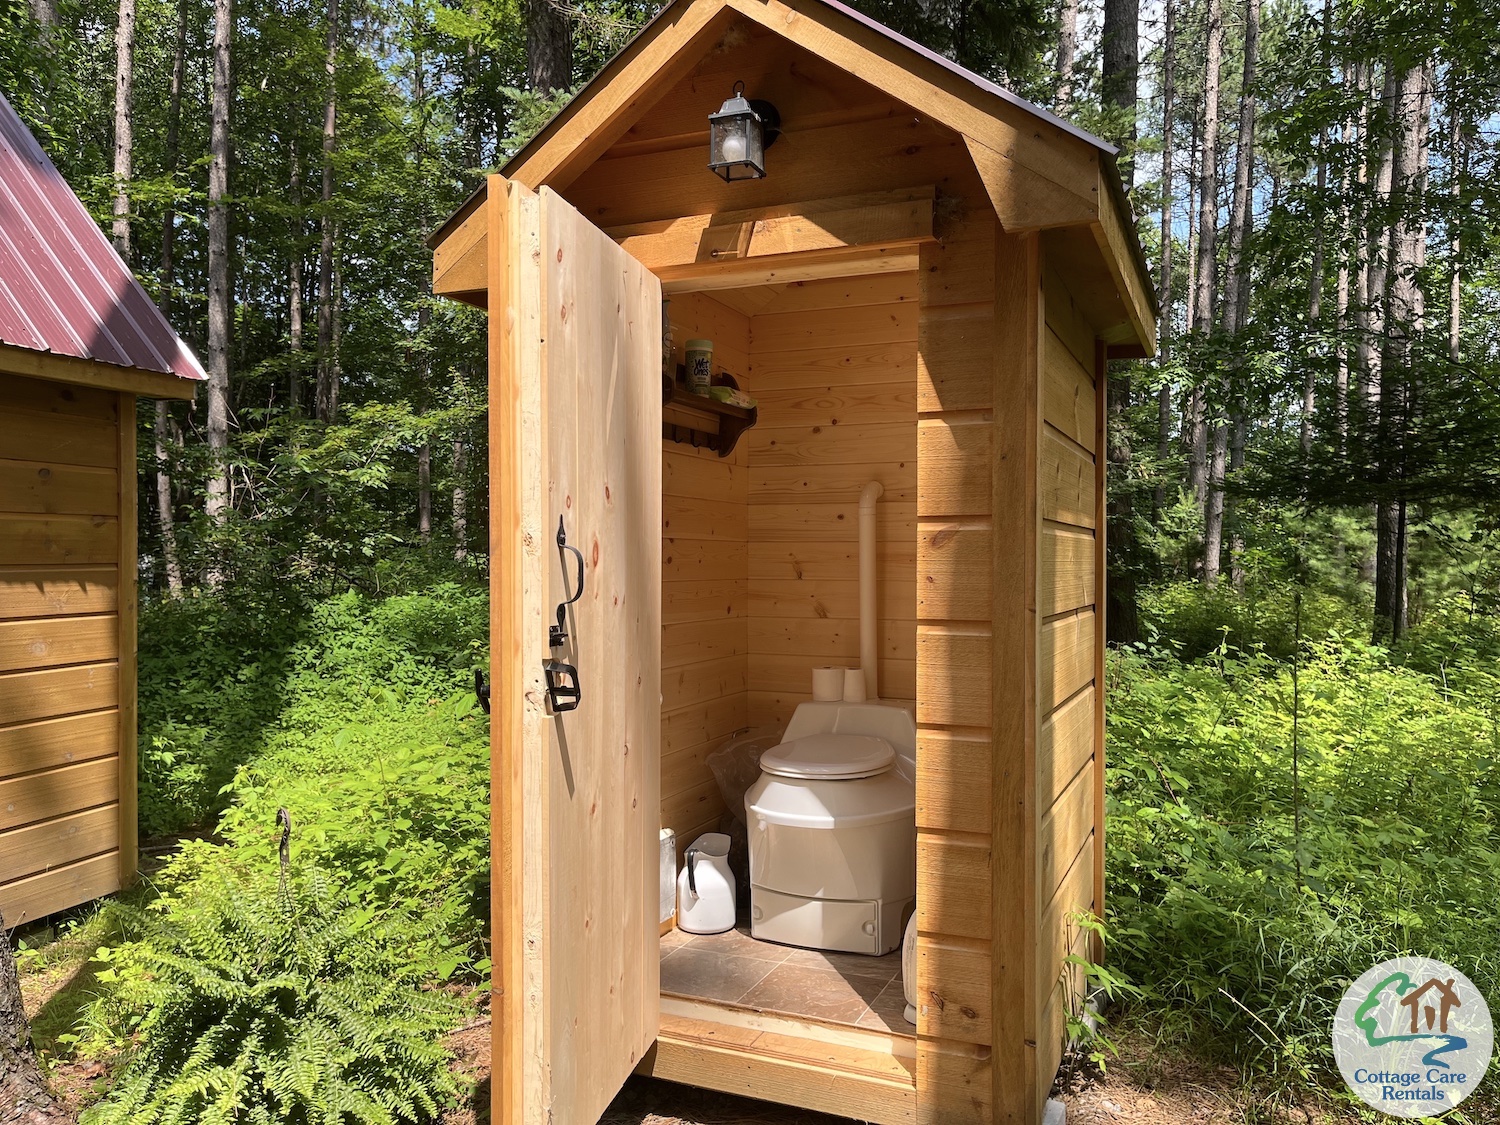 Boshkung Acres - Electric composting toilet privy house